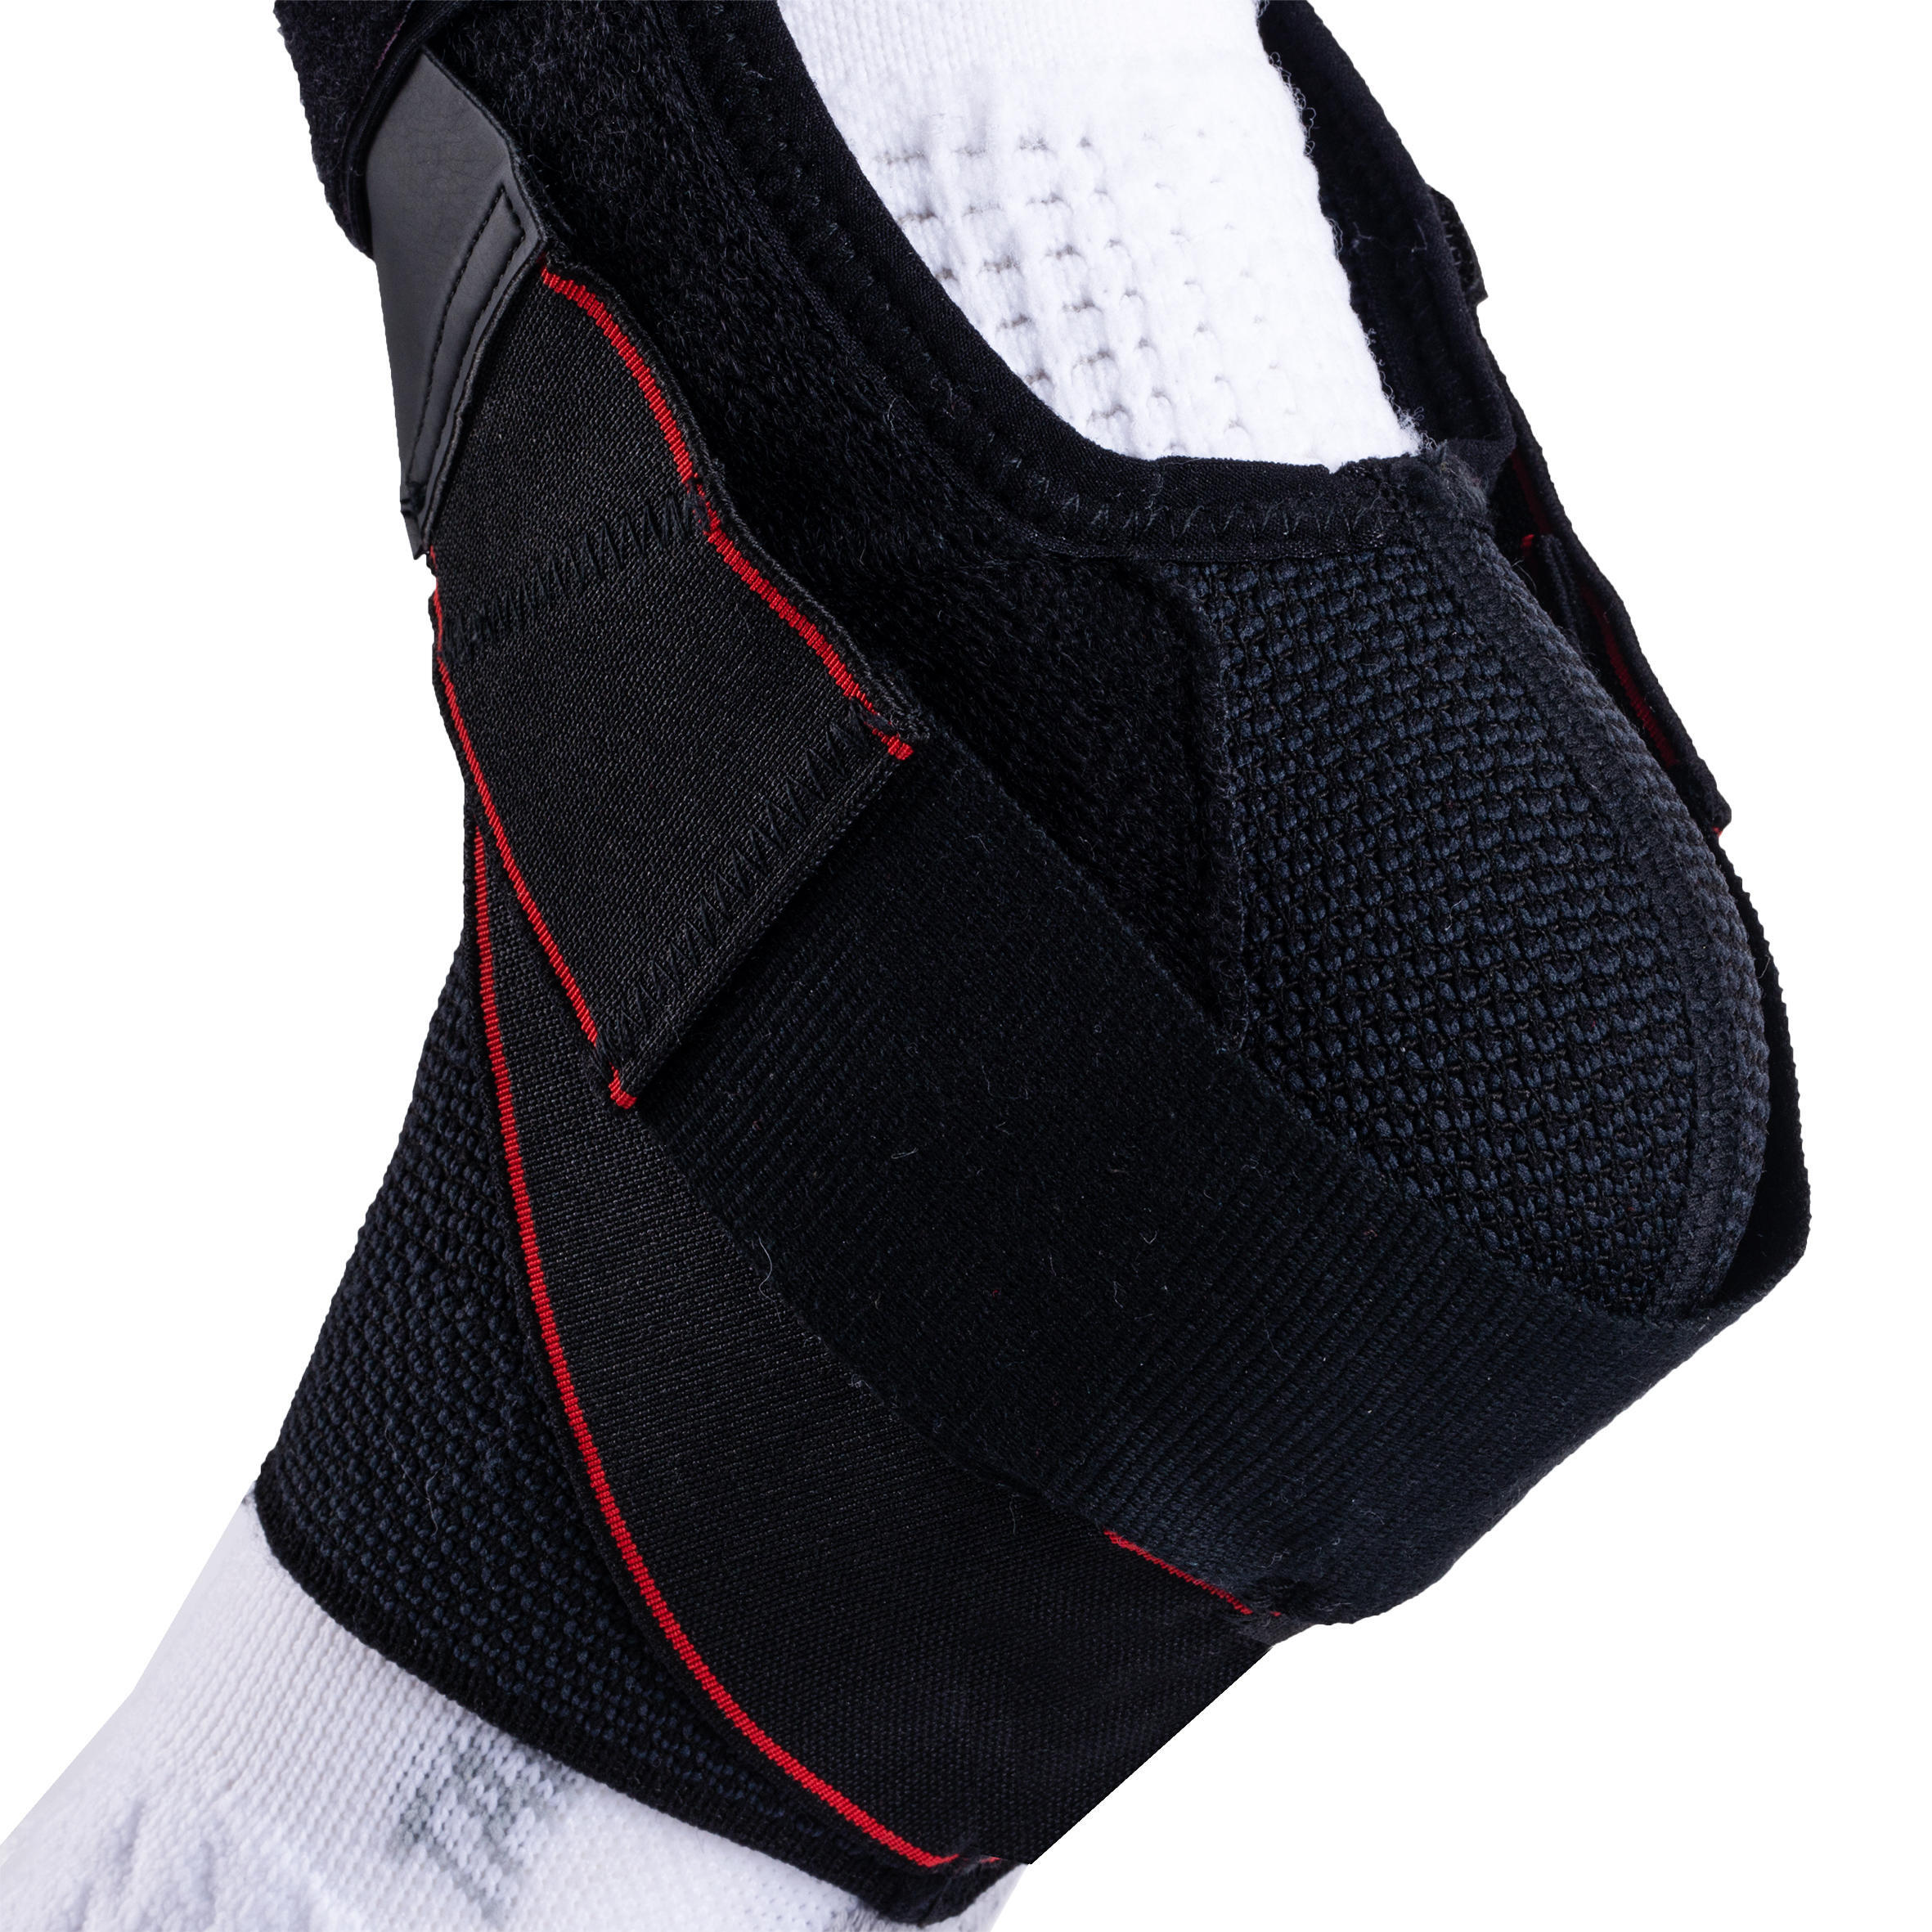 Strong 500 Men's/Women's Right/Left Ankle Ligament Support - Black 3/7